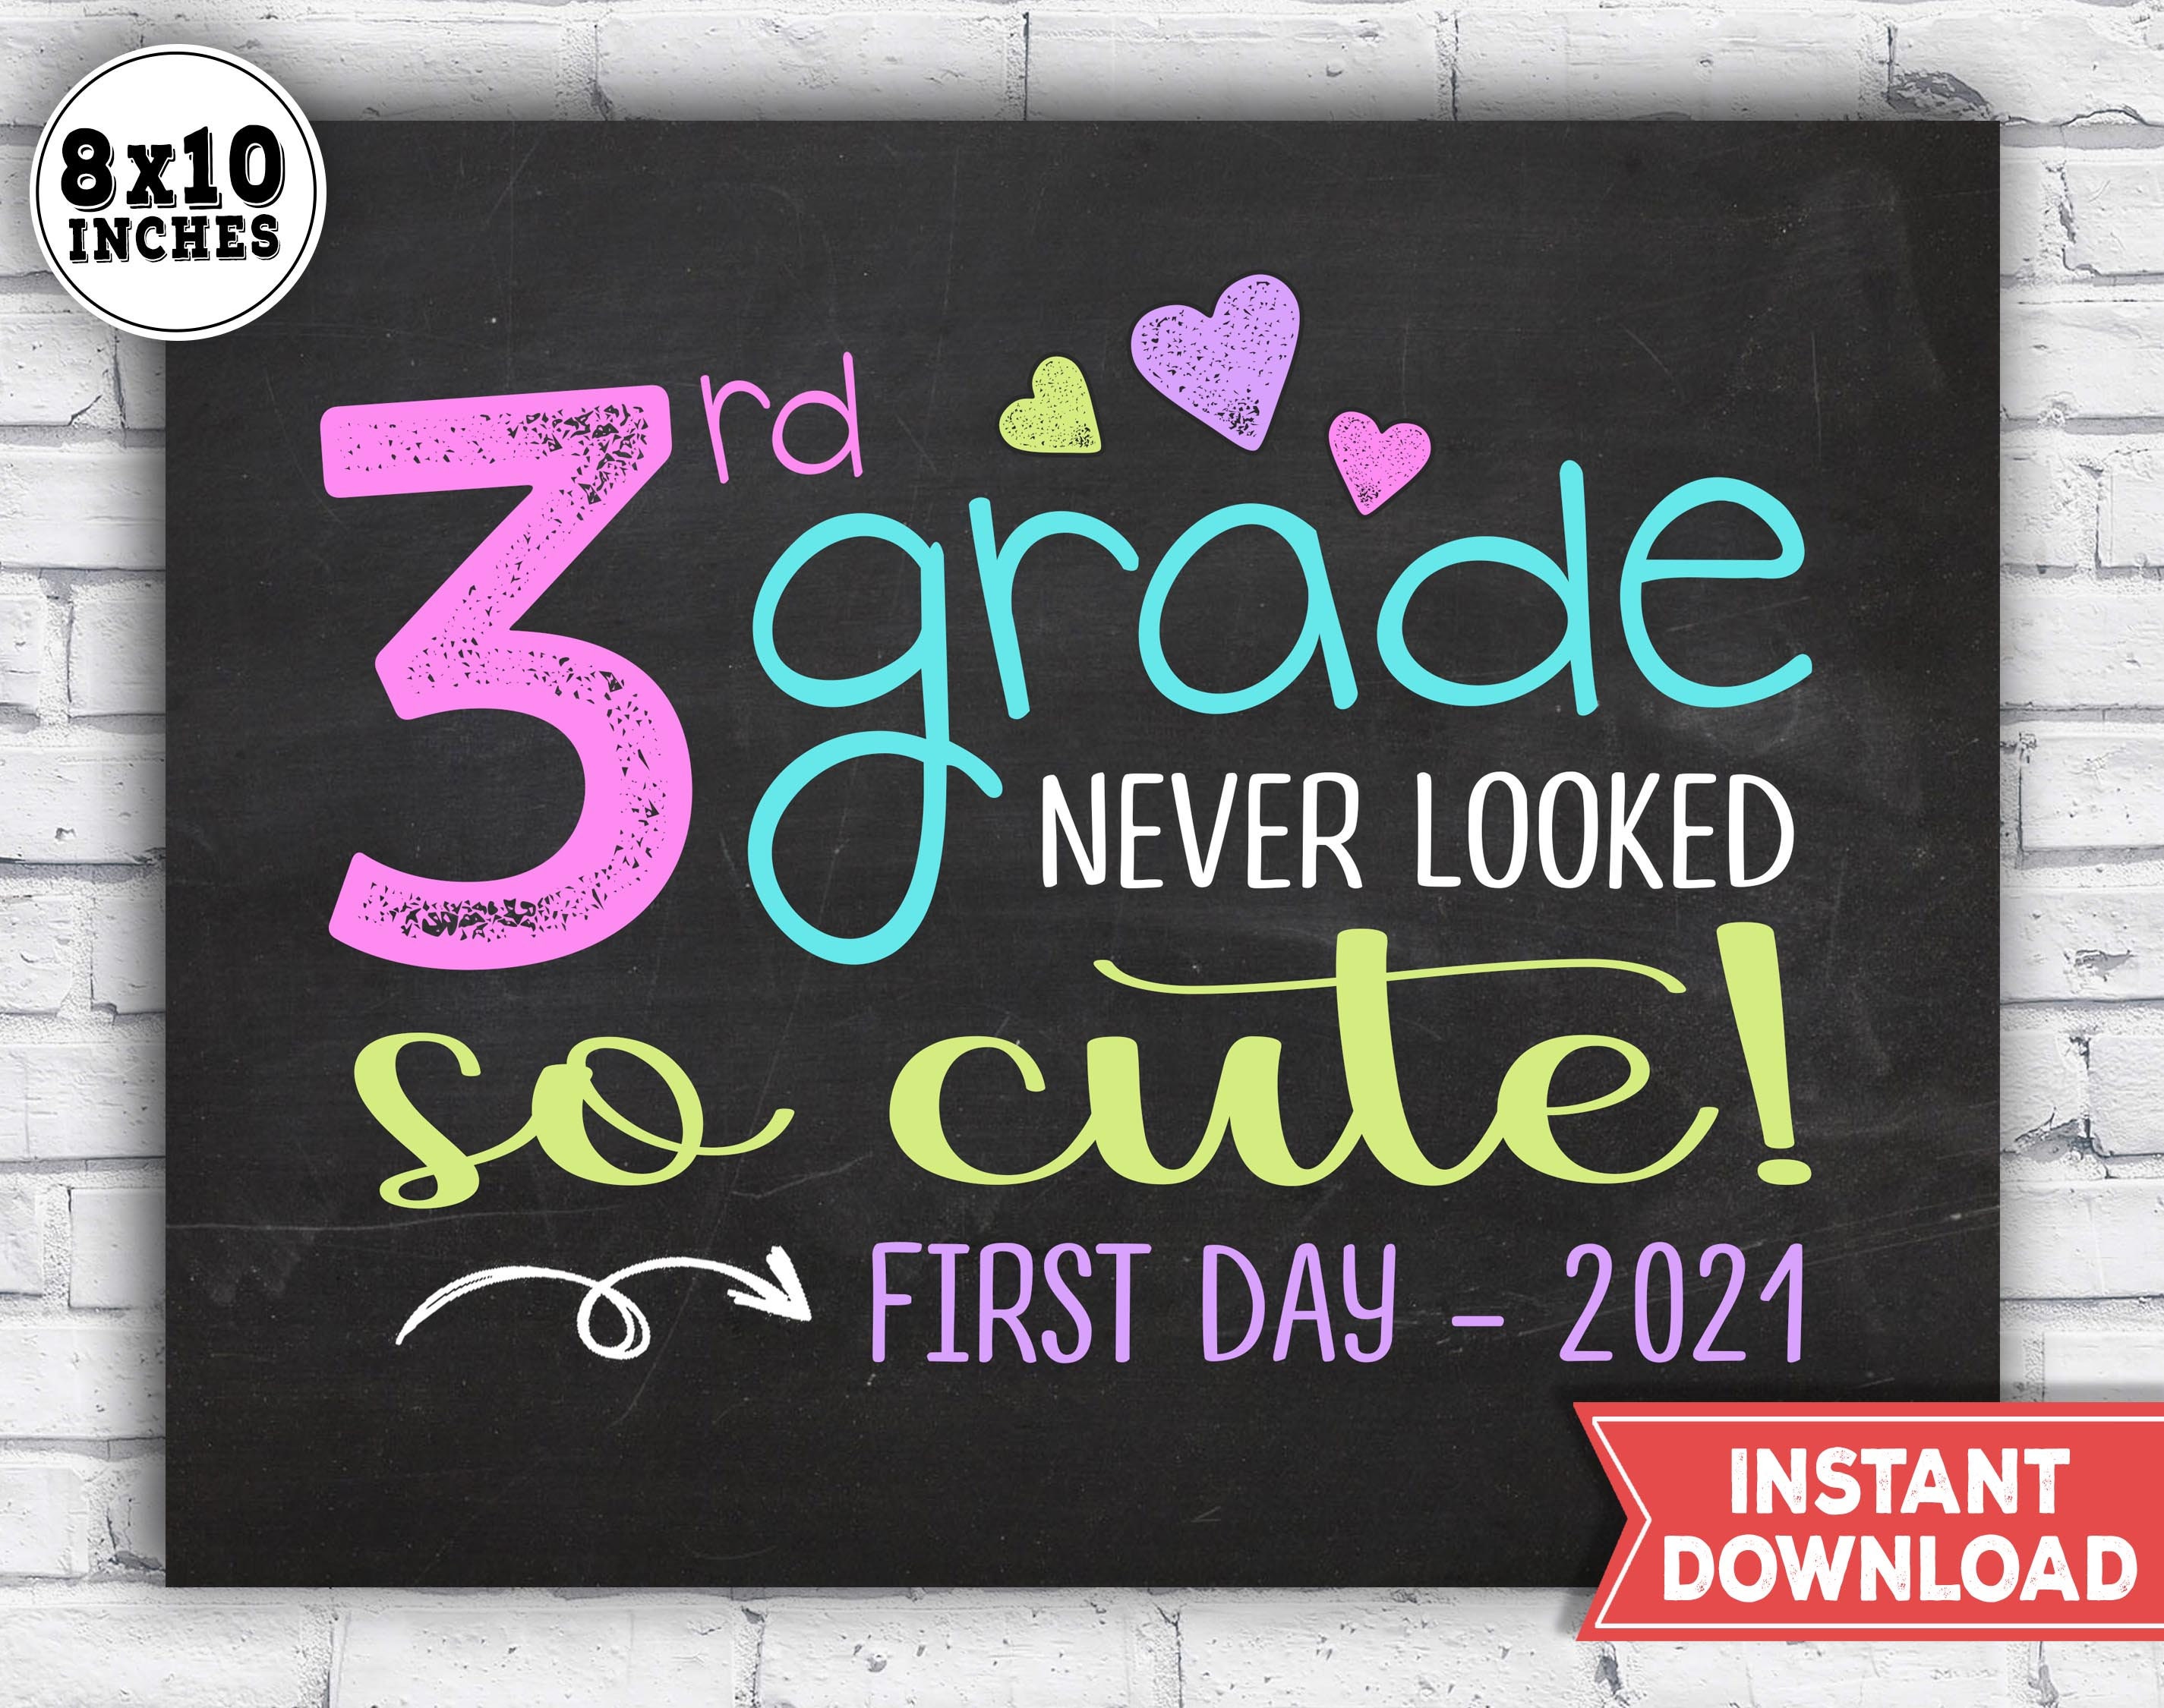 1st-day-of-3rd-grade-sign-first-day-of-school-sign-2021-etsy